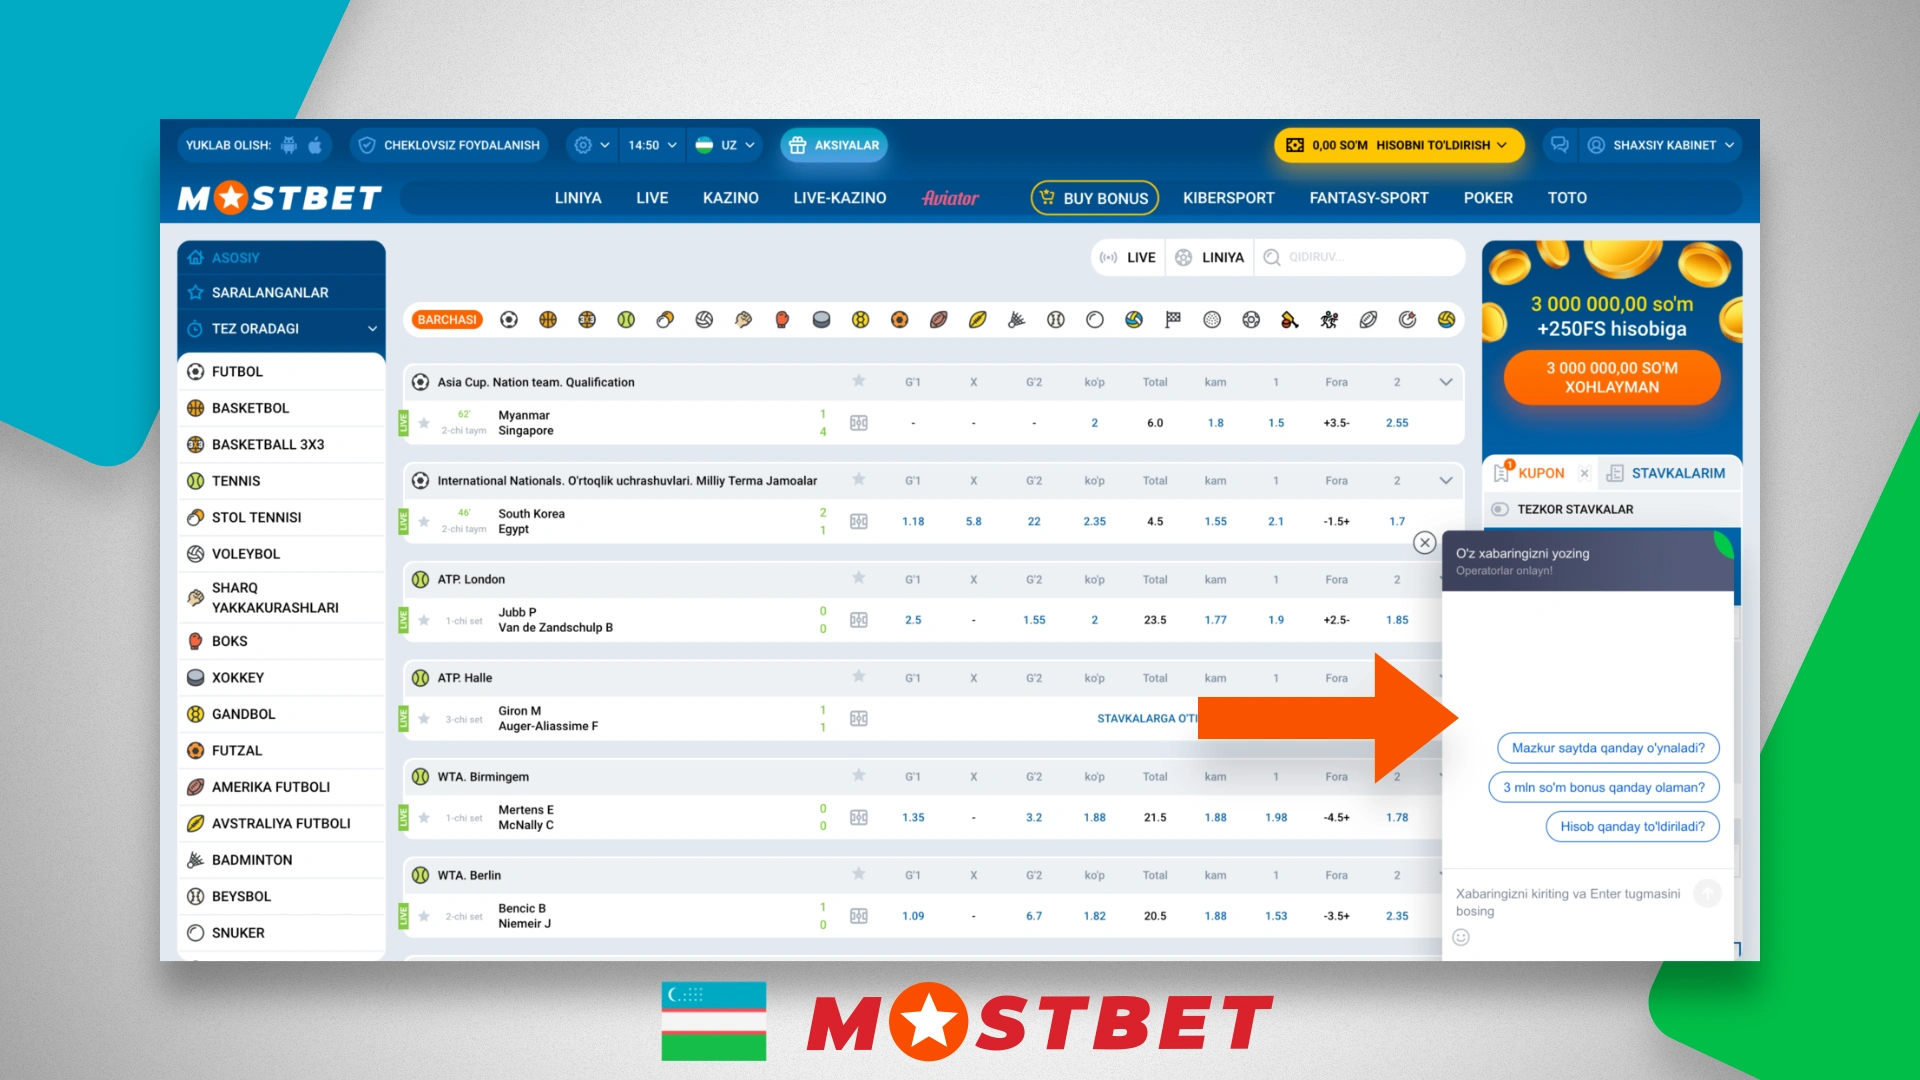 Online chat with Mostbet Uzbekistan customer support